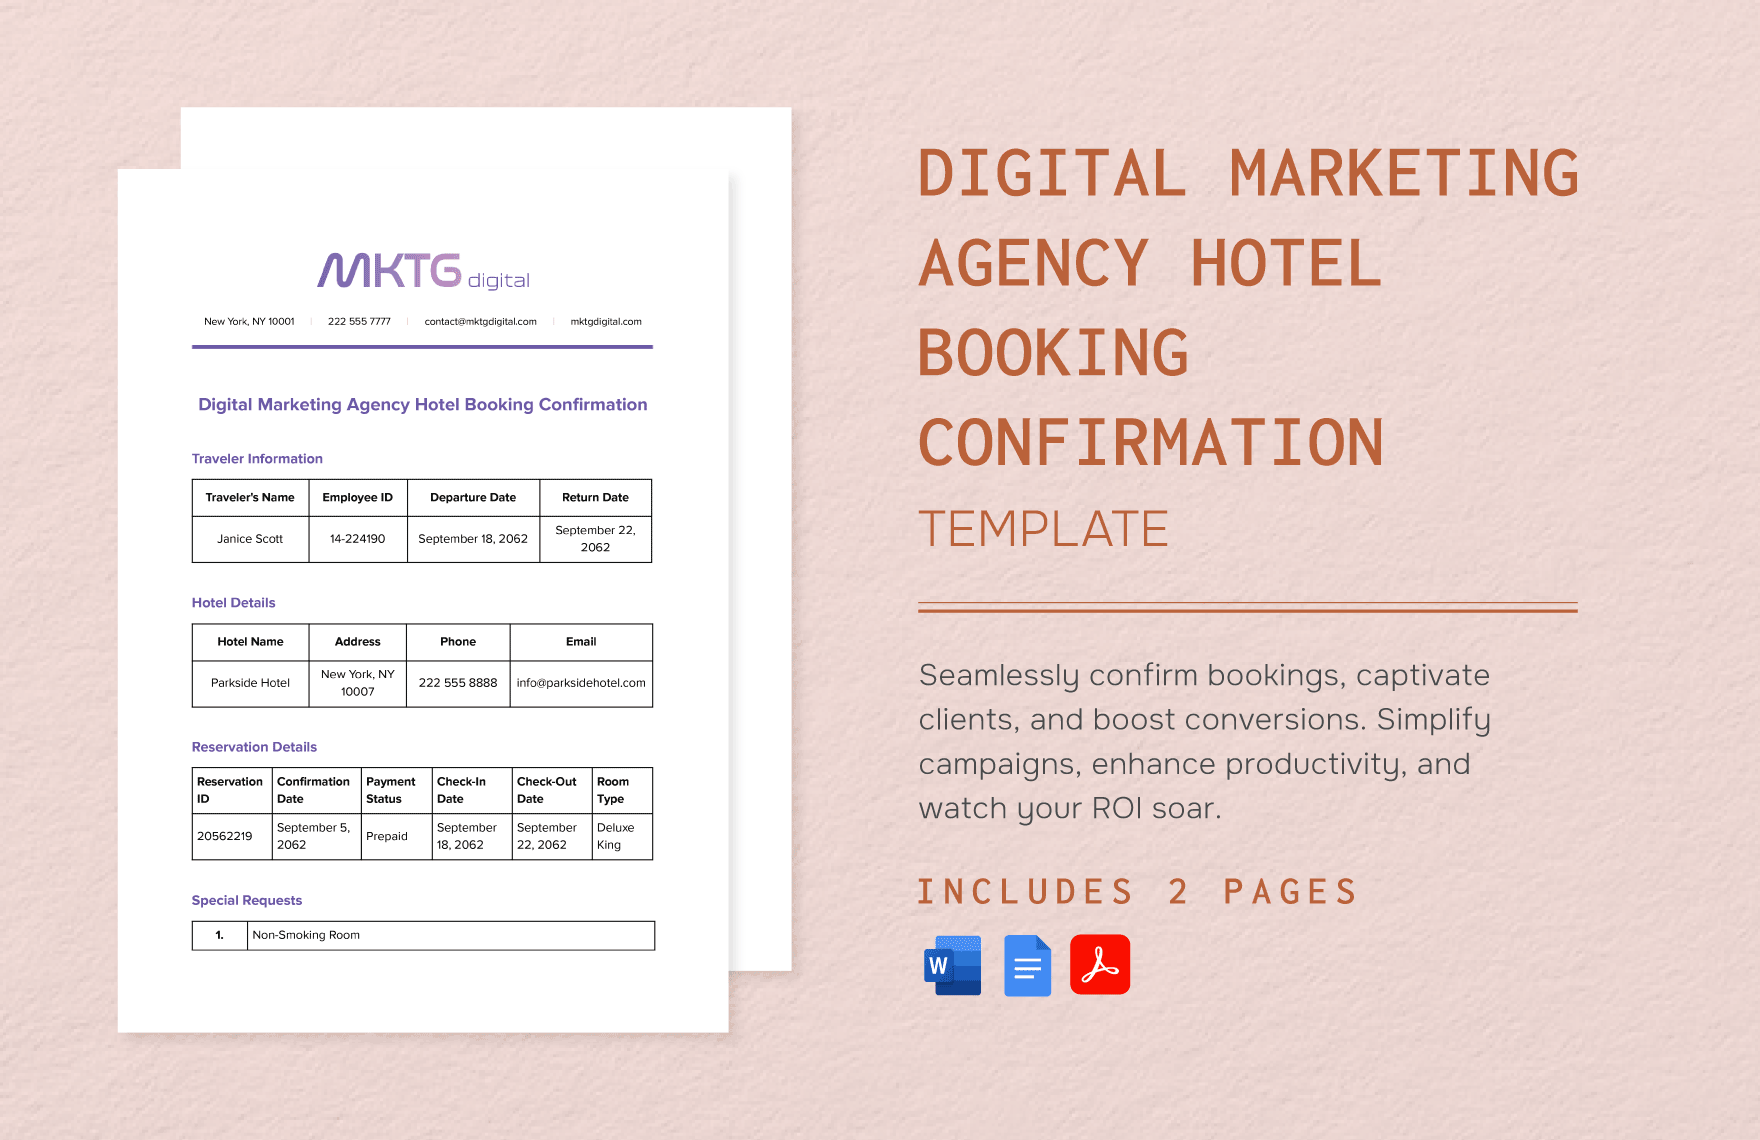 Digital Marketing Agency Hotel Booking Confirmation Template